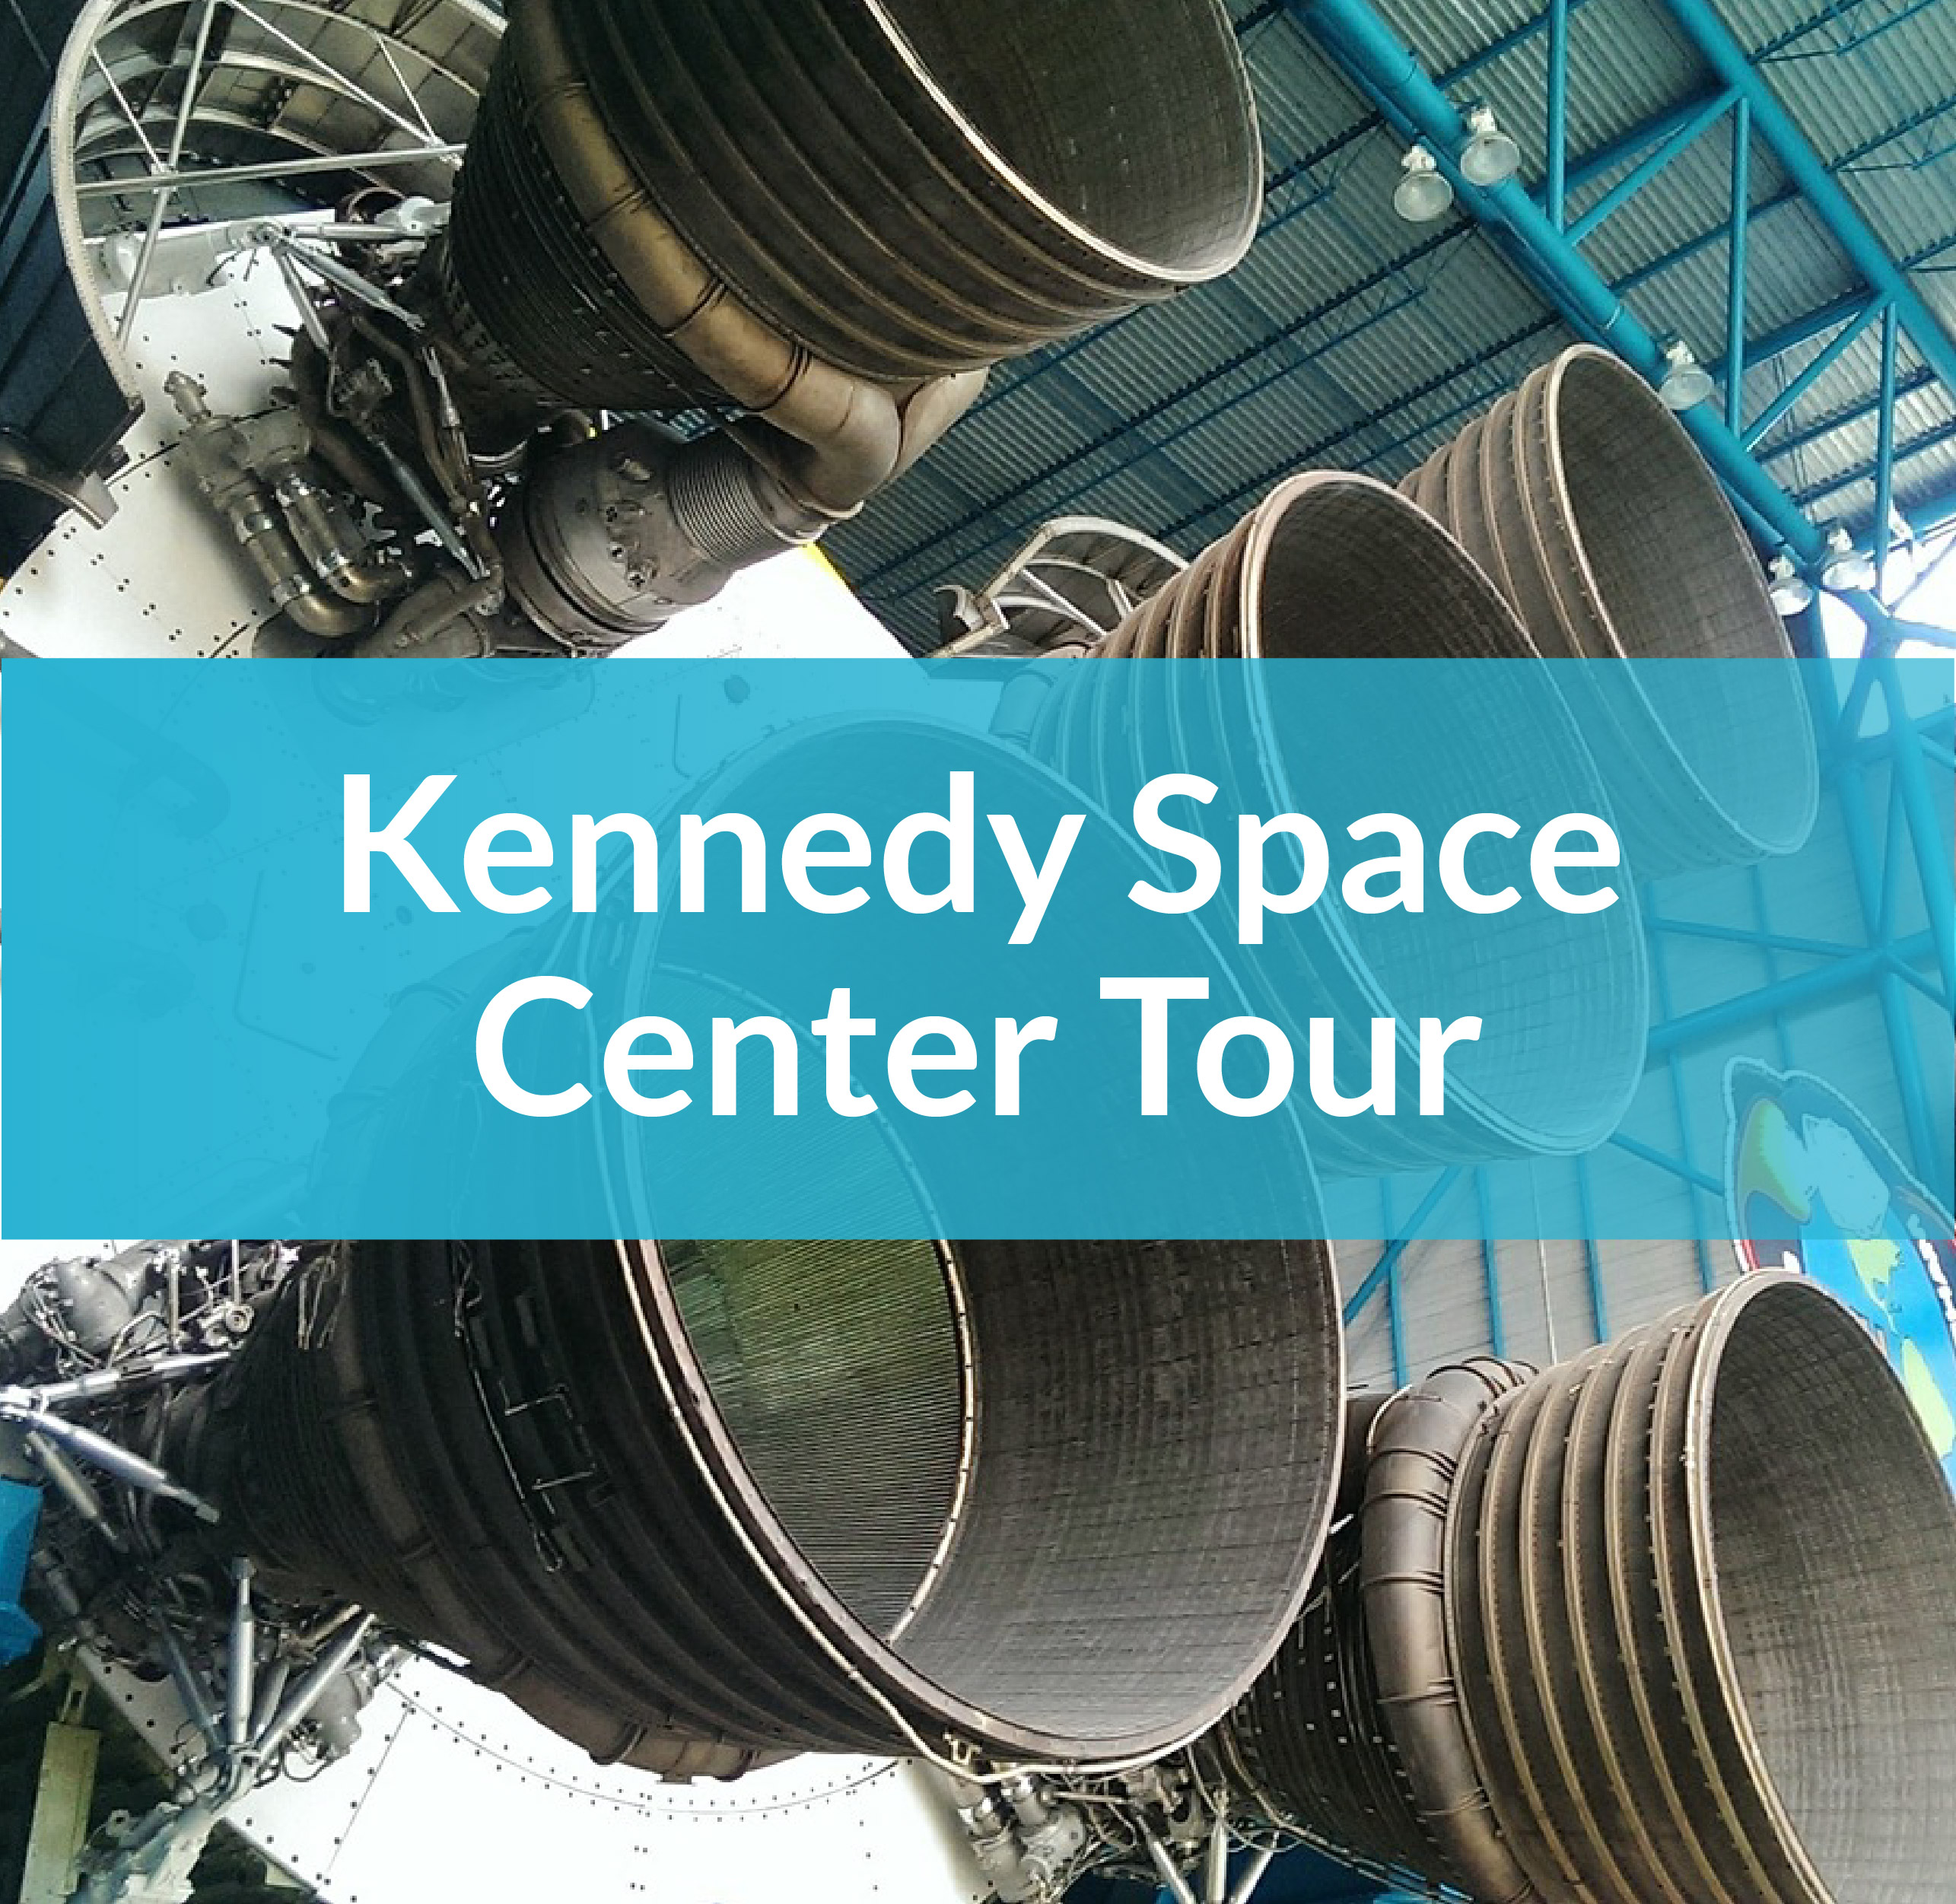 Kennedy Space Center Tour - Central Florida Attractions - staysky Suites I-Drive Orlando